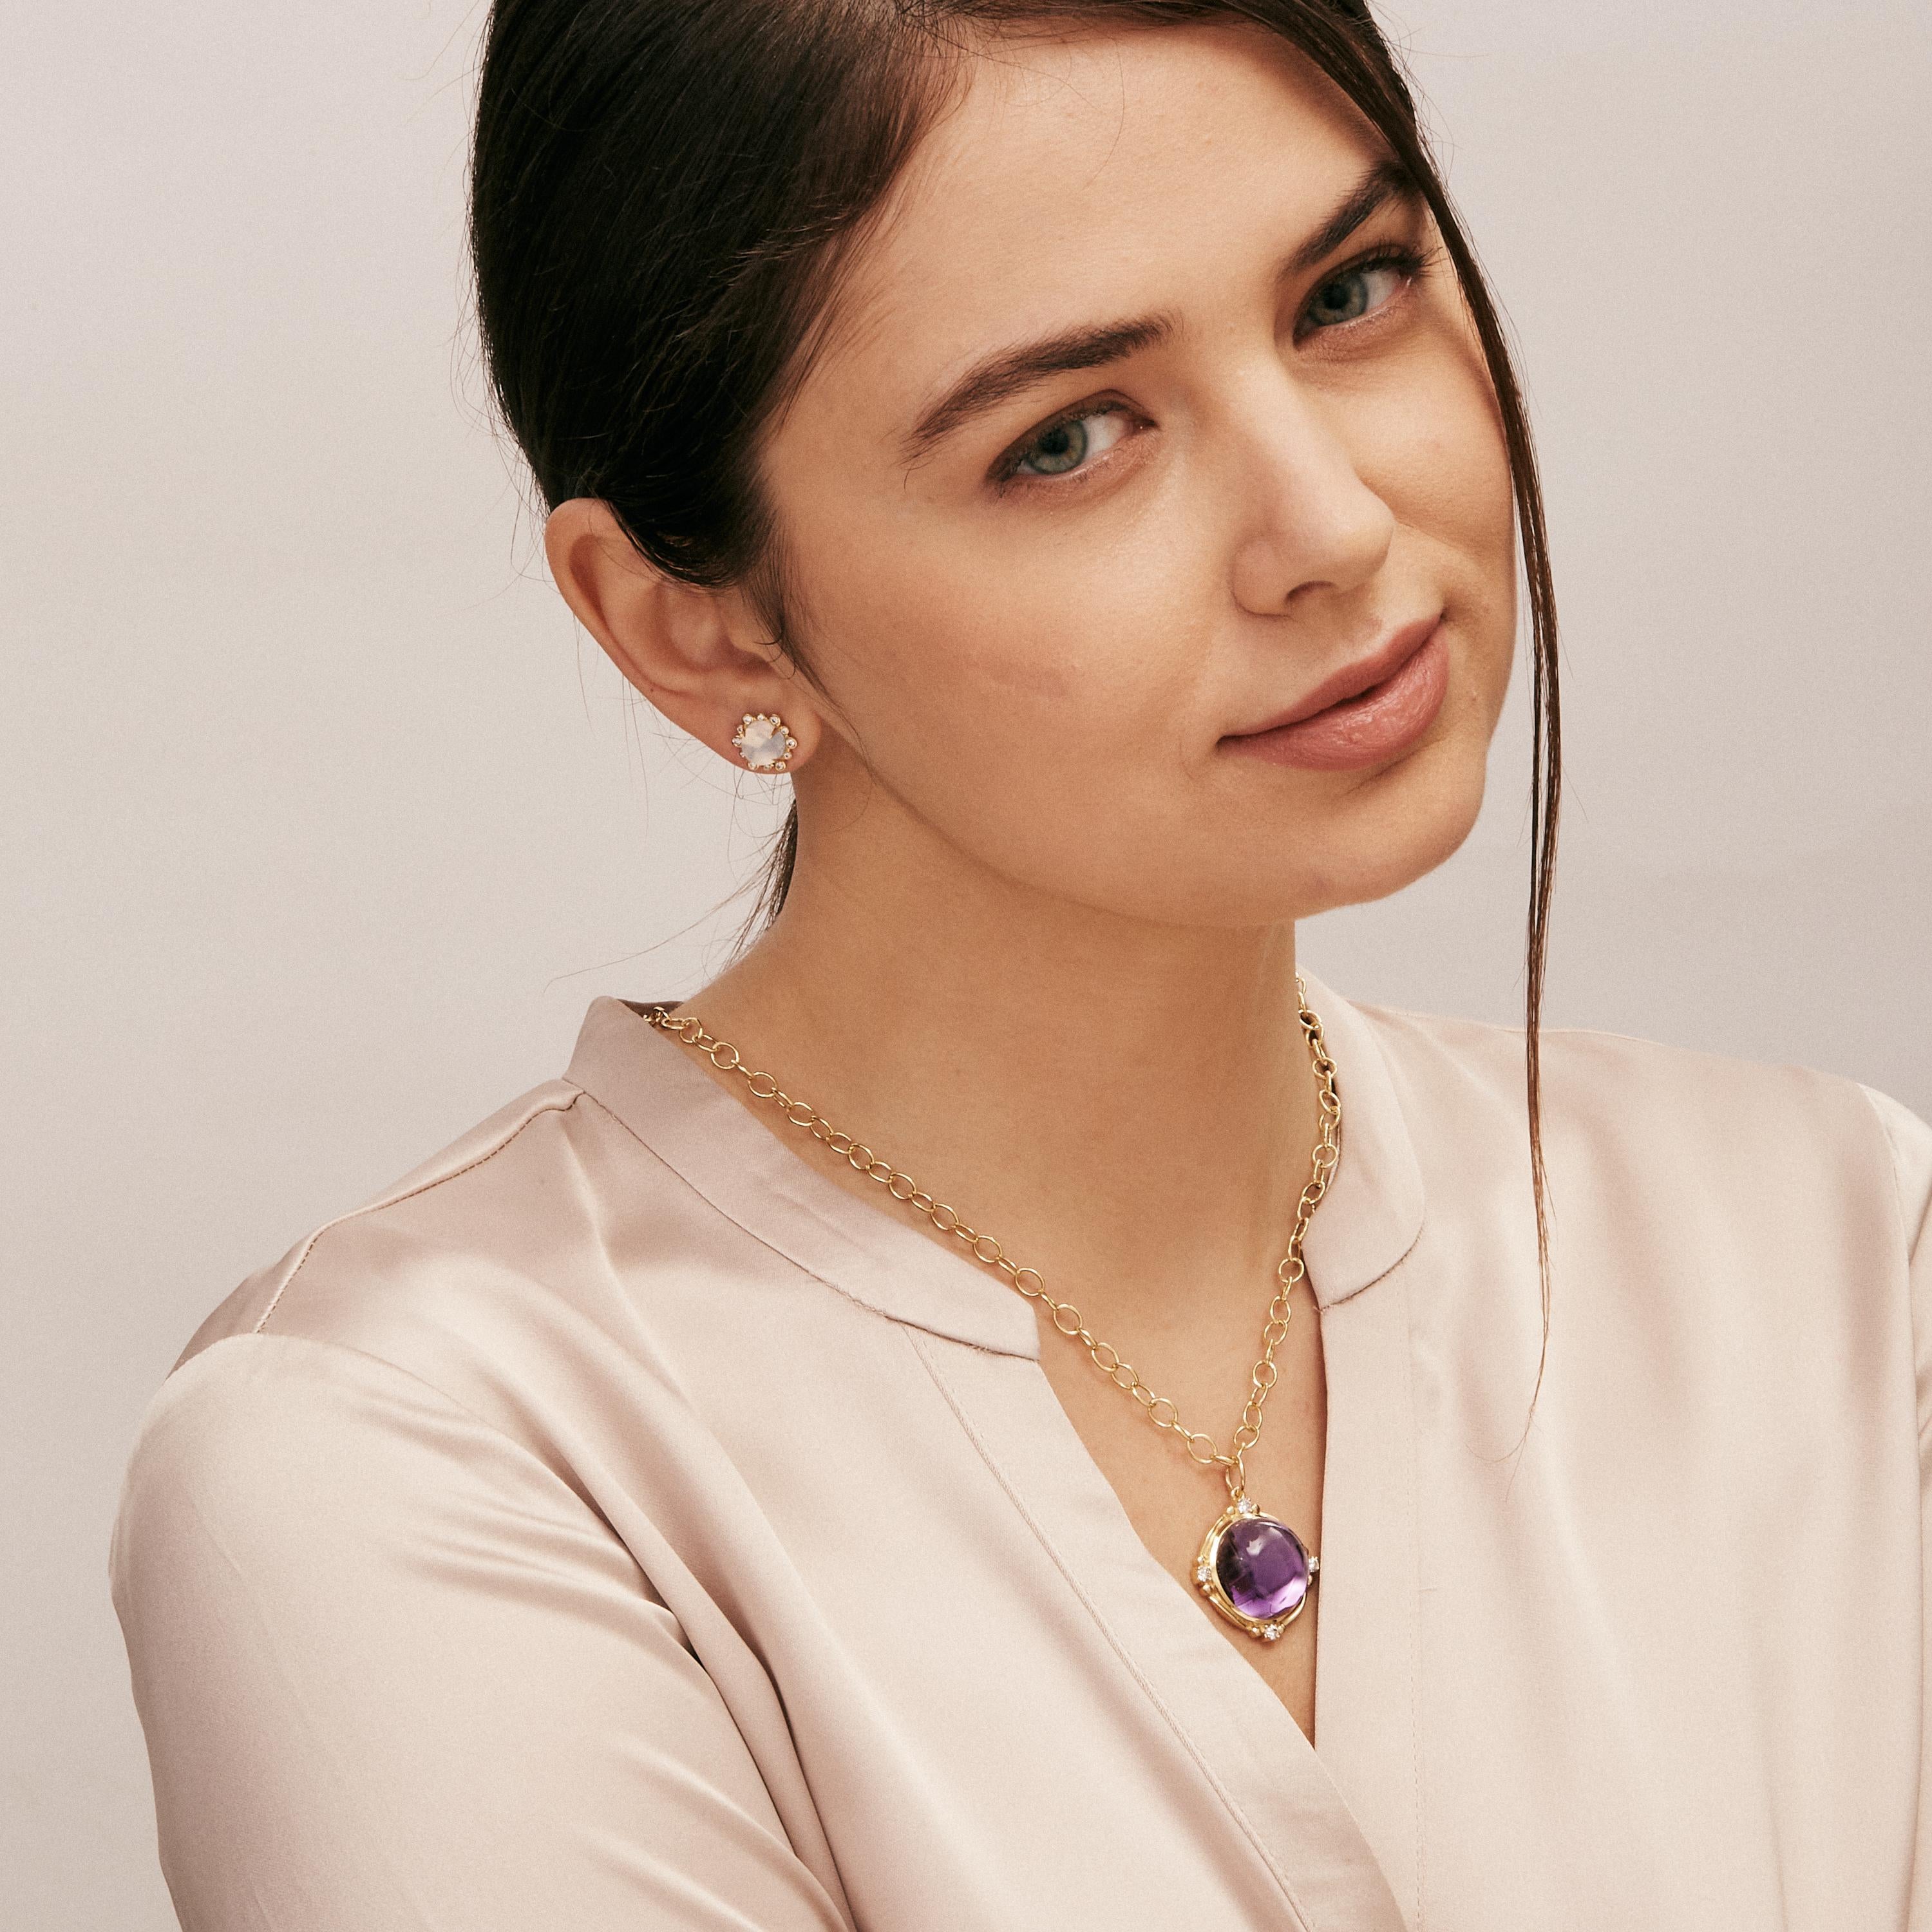 Created in 18 karat yellow gold
Amethyst 25 carats approx.
Diamonds 0.35 carat approx.
Chain sold separately 
Limited edition

Fashioned from 18 karat yellow gold, this limited edition pendant showcases a 25-carat amethyst and 0.35 carats of